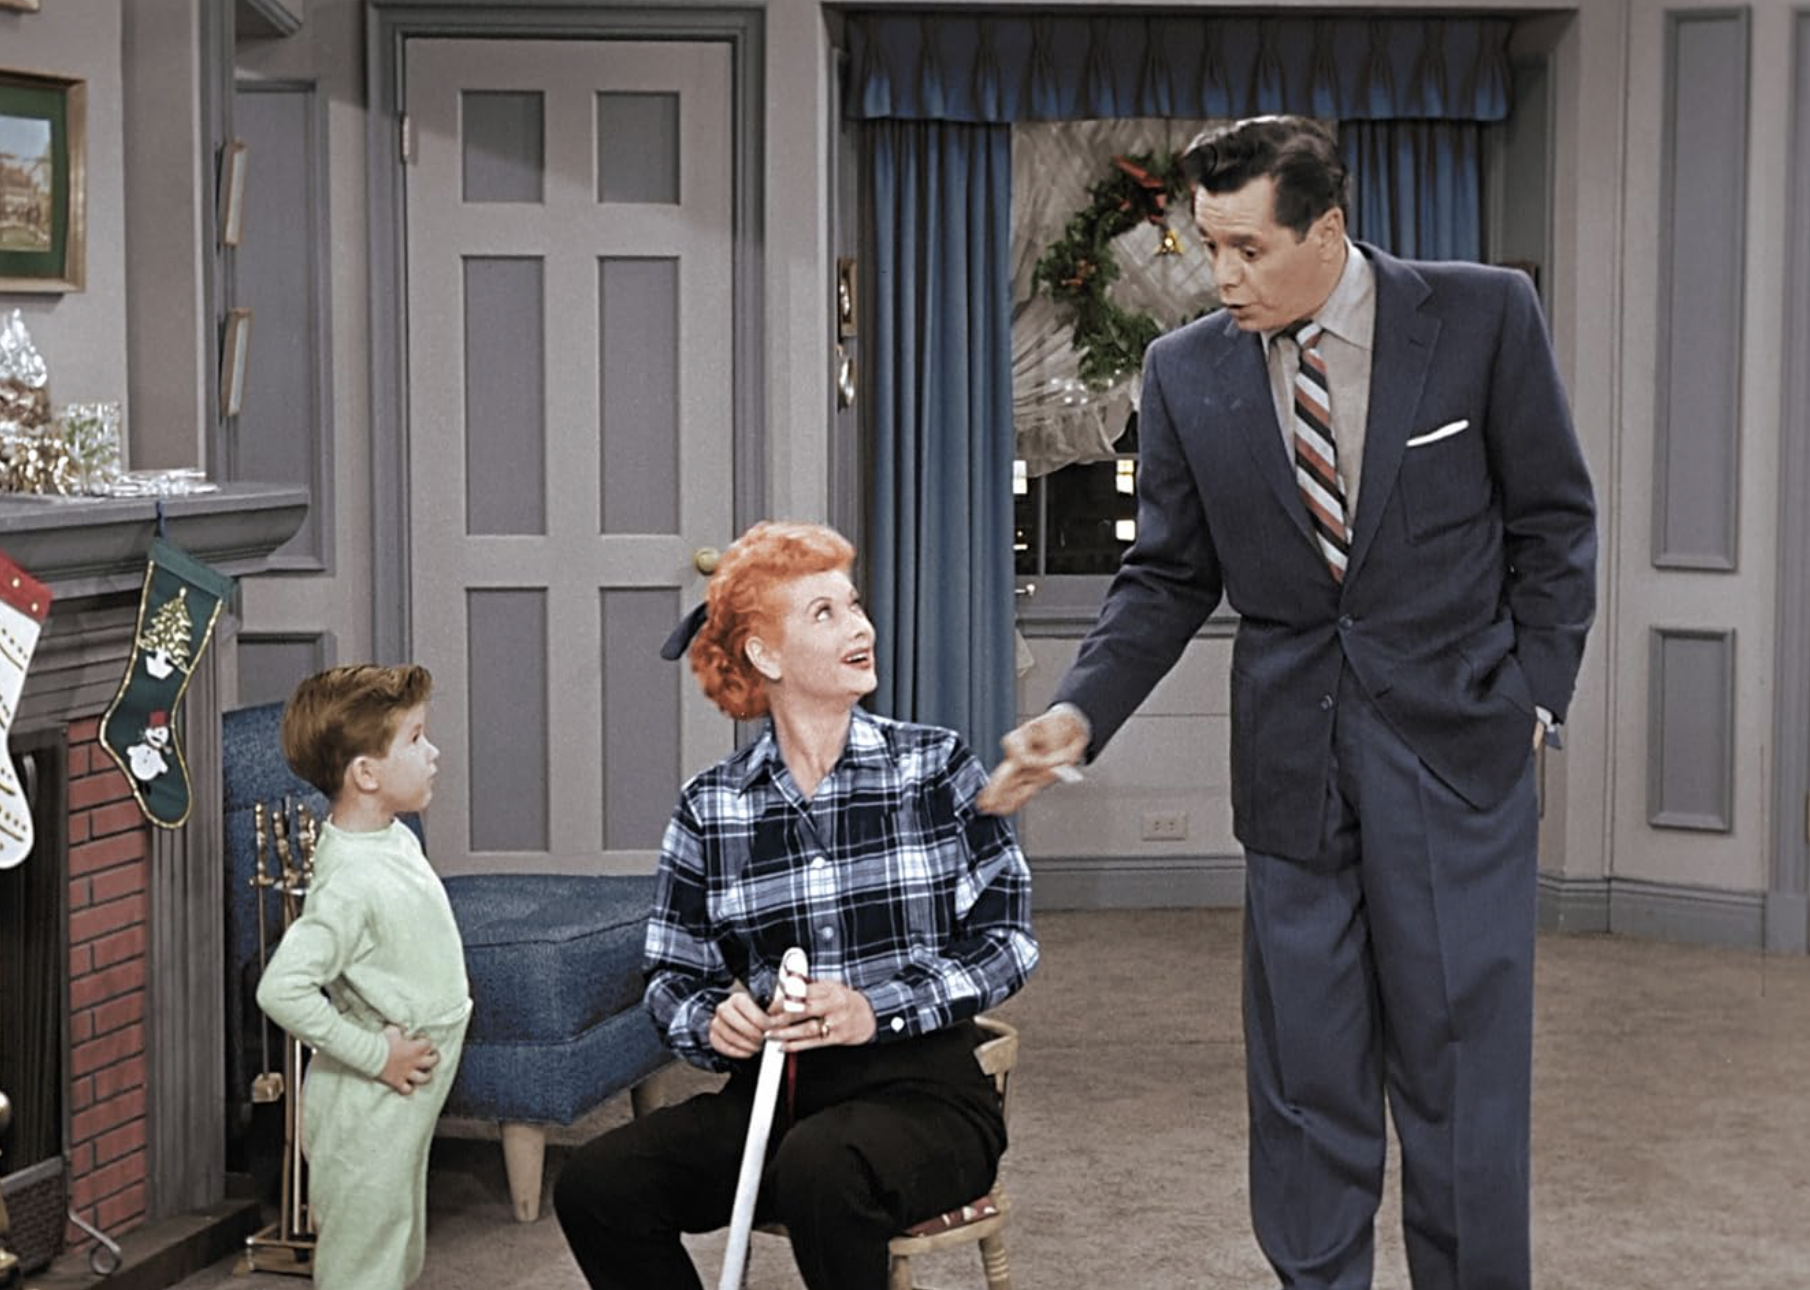 Desi Arnaz, Lucille Ball, and Richard Keith in "I Love Lucy".